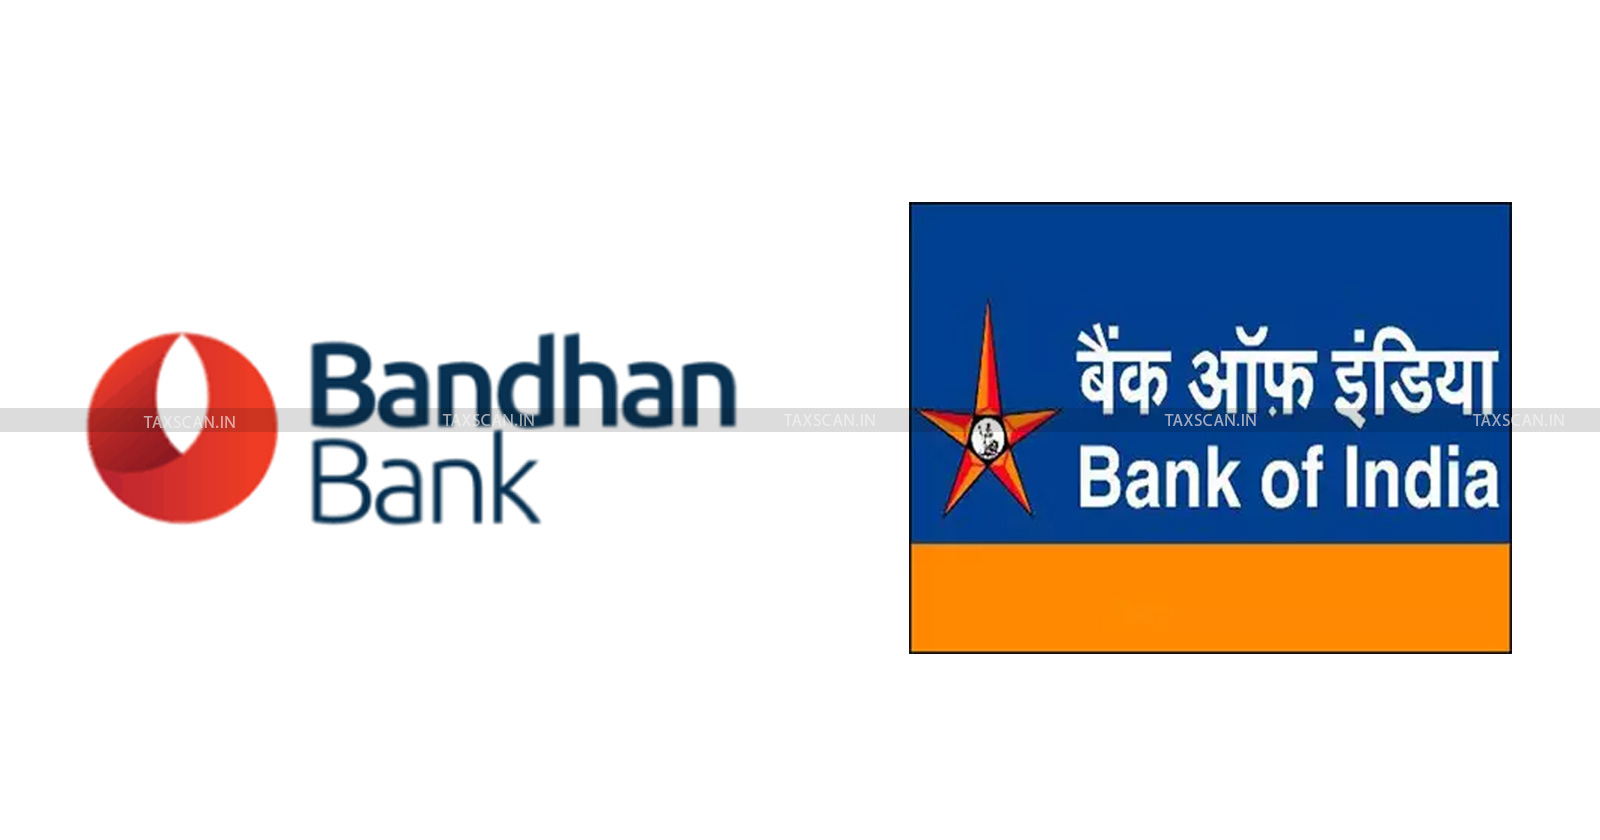 RBI - Reserve Bank Of India - Bank of India - Bandhan Bank - Penalty on Bank of India - RBI Penalty Bank of India Bandhan Bank - Taxscan